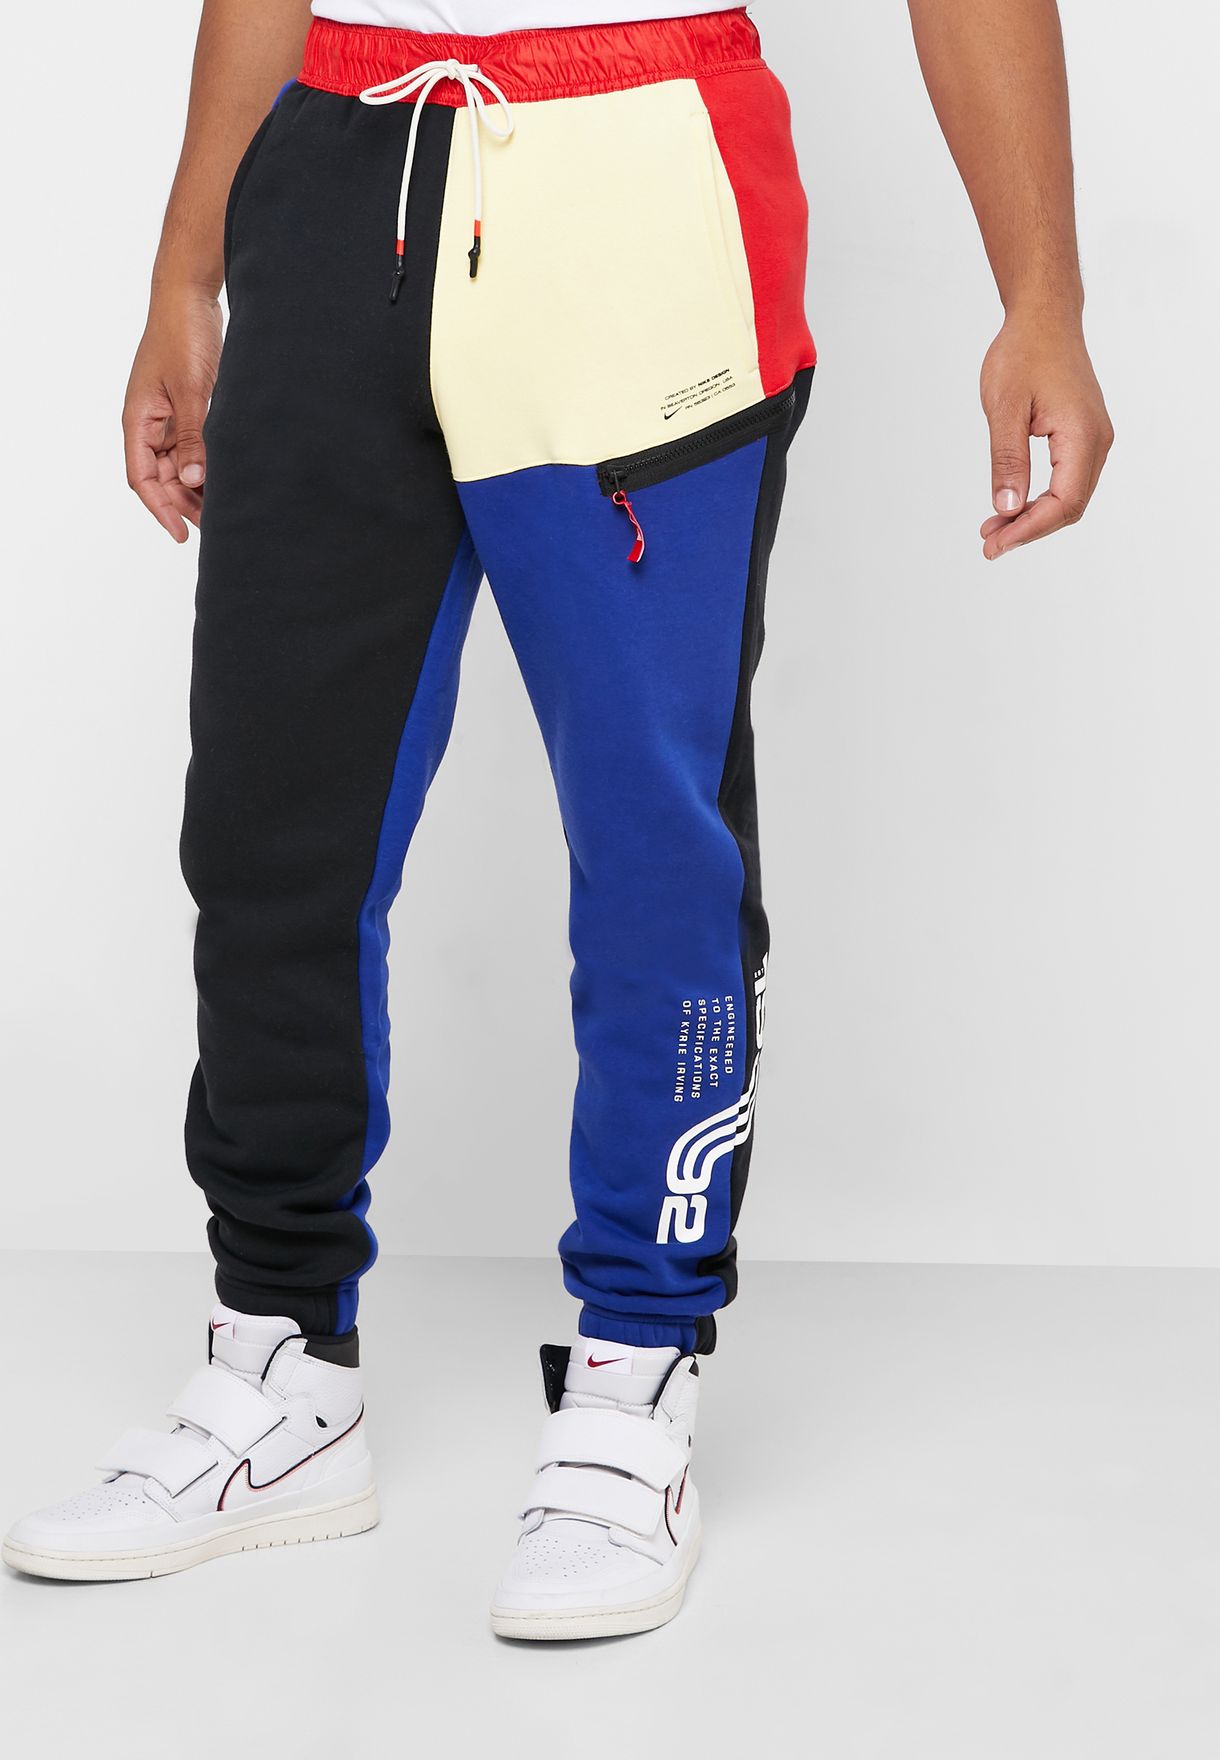 kyrie irving jogging pants